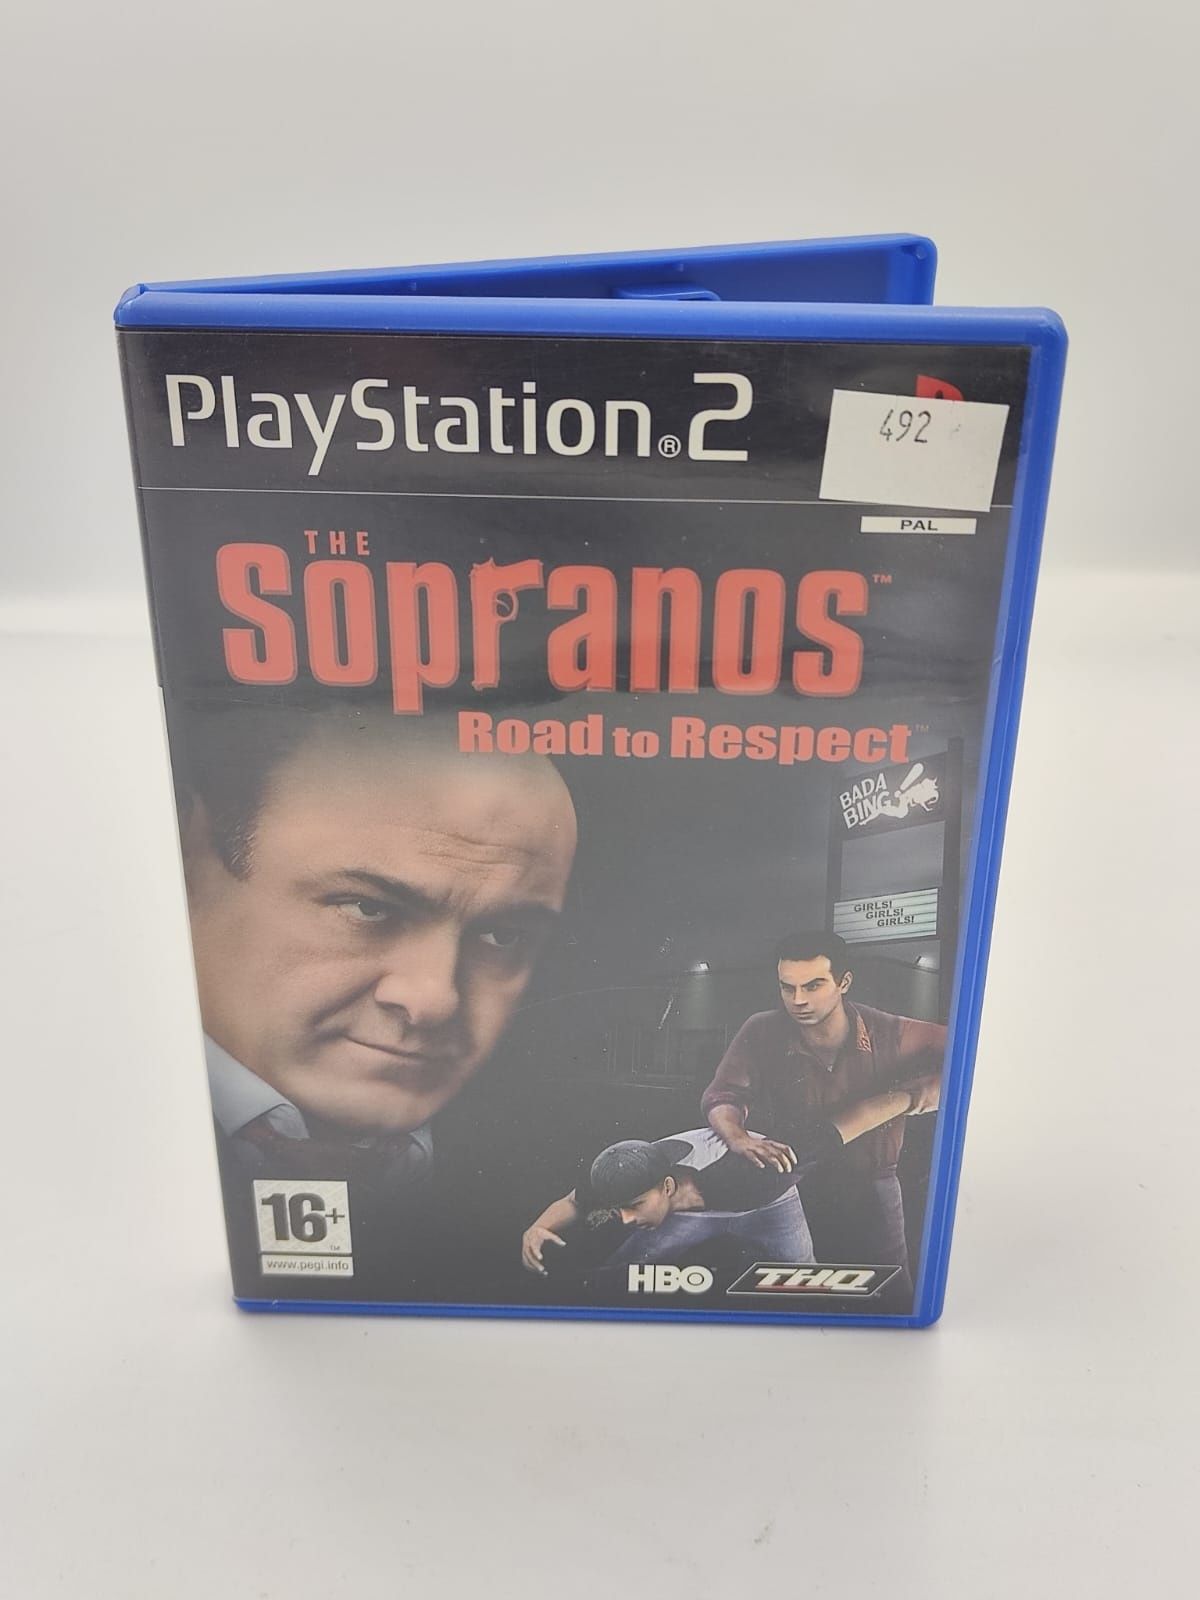 The Sopranos Road To Respect Ps2 nr 0492